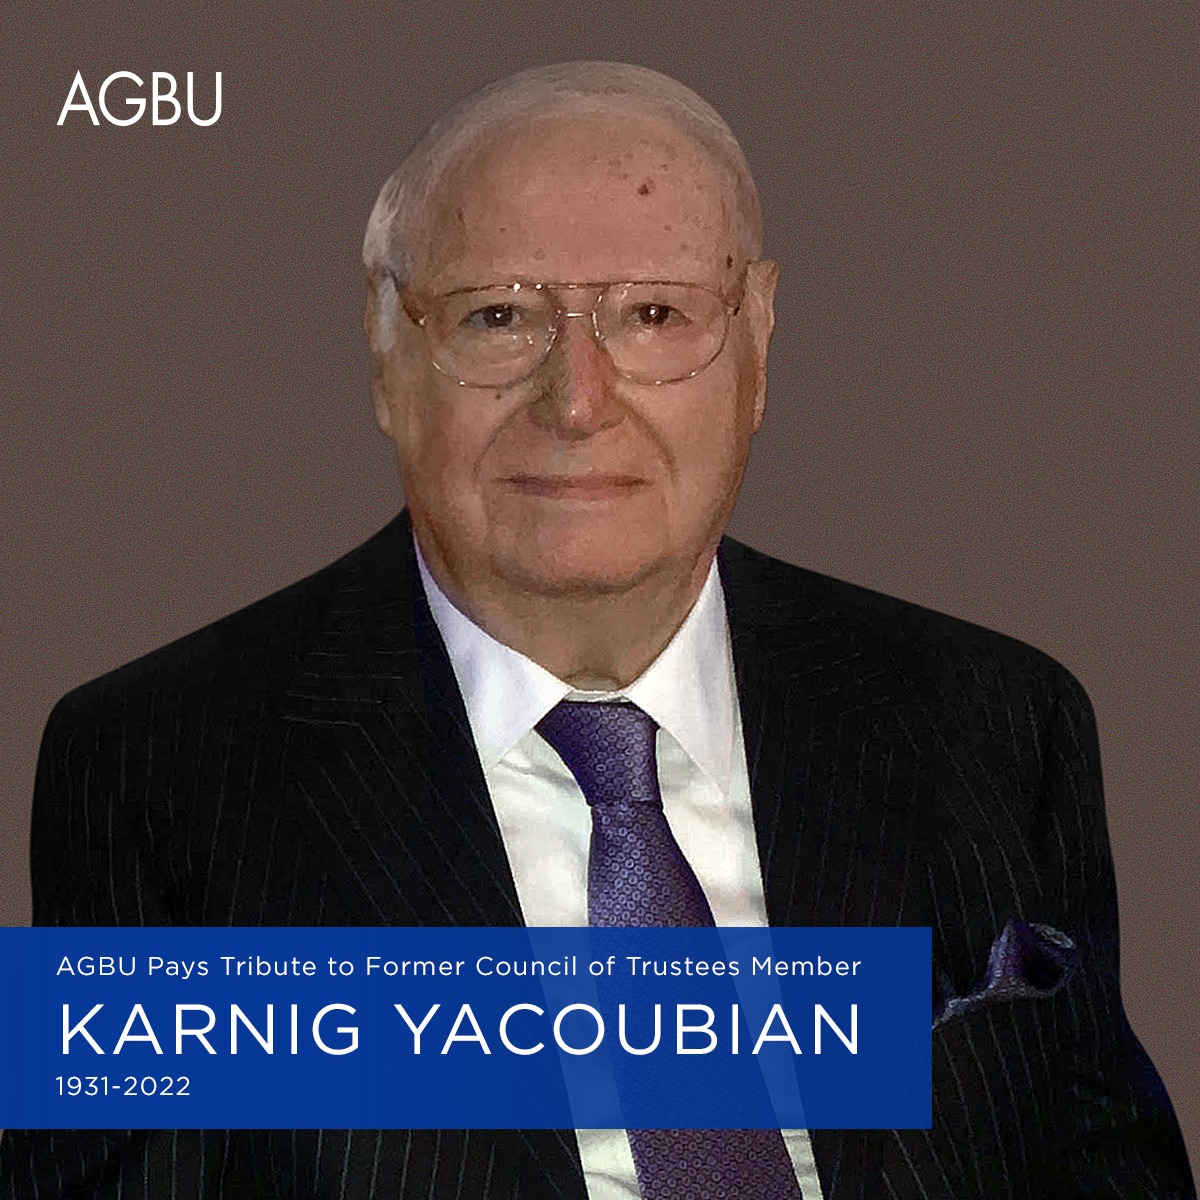 The Armenian Nation together with the AGBU and the Armenian Church grieve the loss of one of their most faithful sons, Mr. Karnig Yacoubian